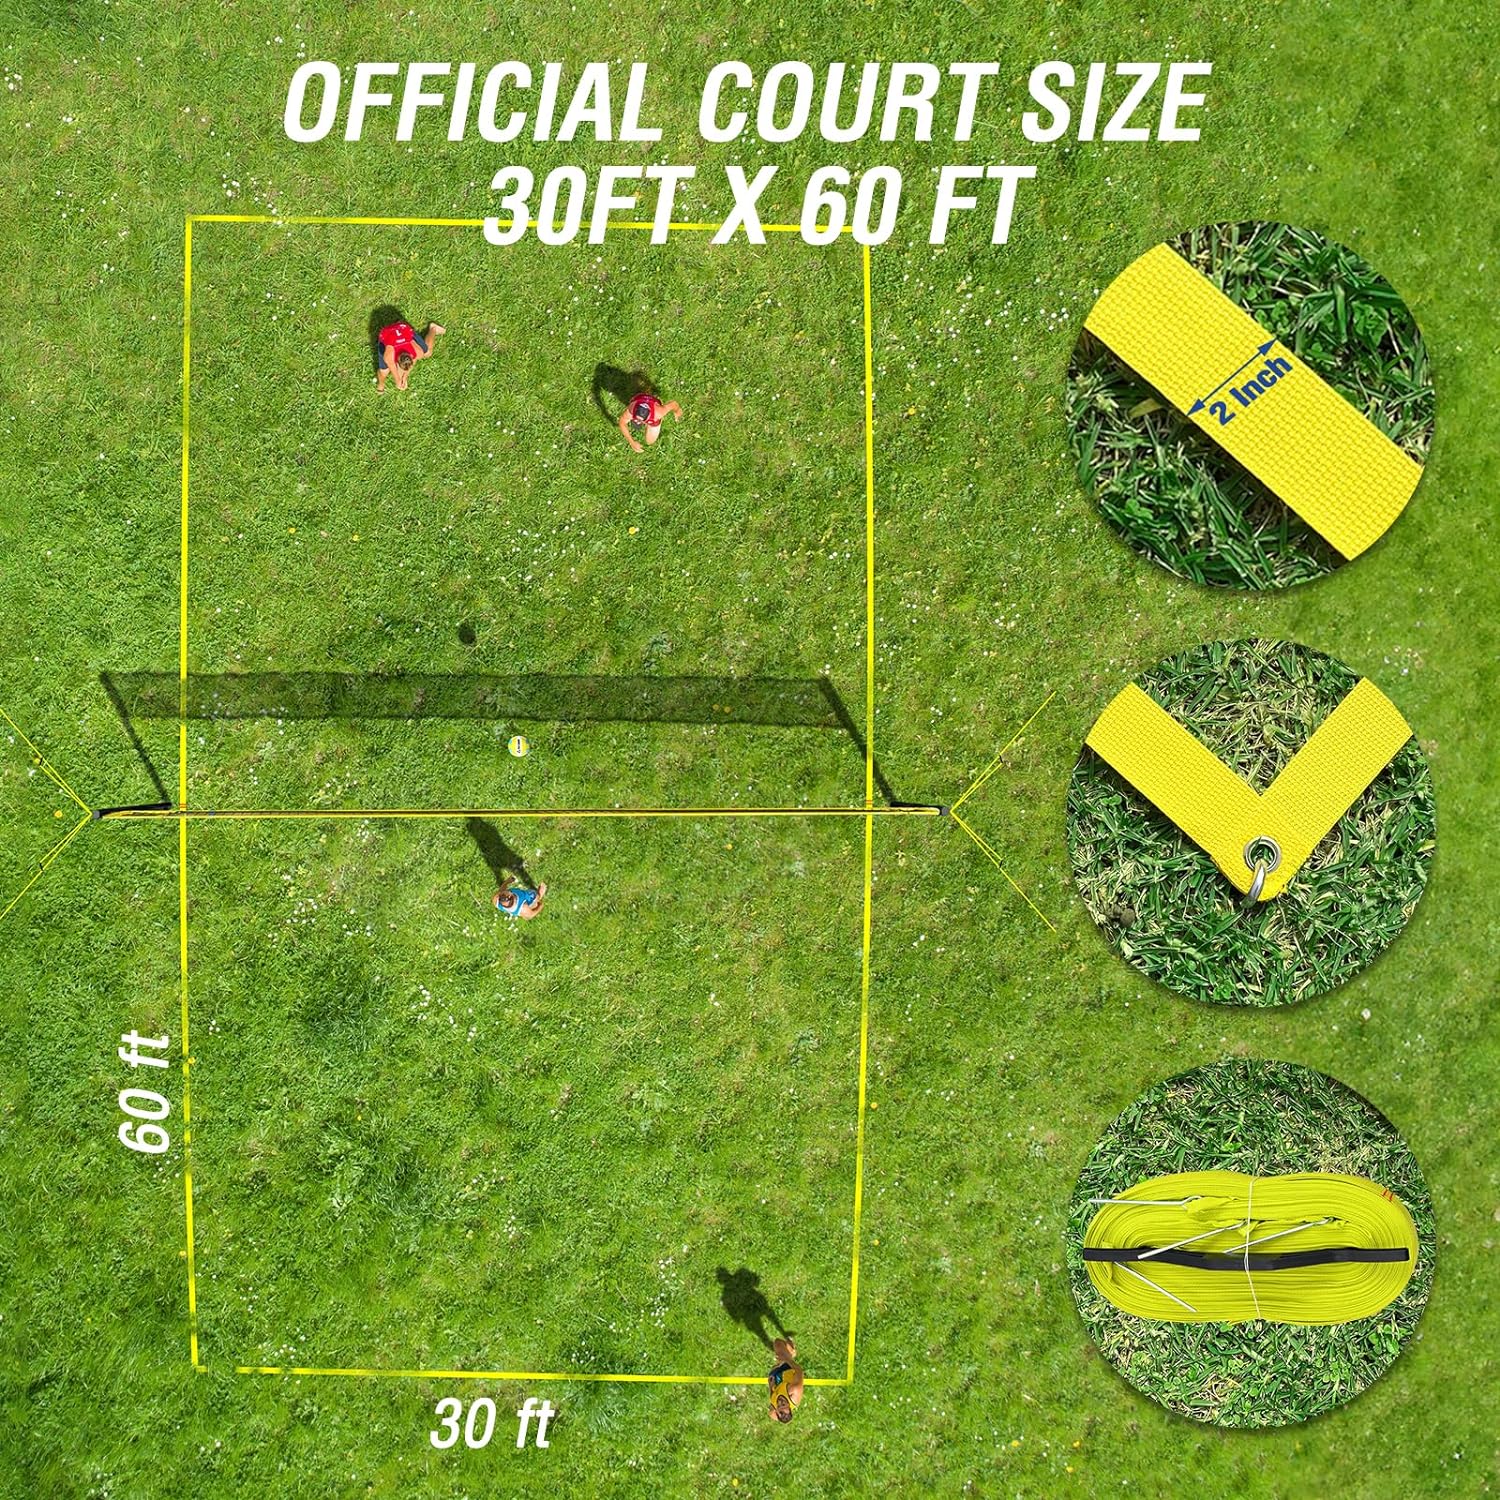 Patiassy Outdoor Volleyball Net Set with Steel Wire Rope and 2 Inch Boundary Line Professional Volleyball Sets for Backyard